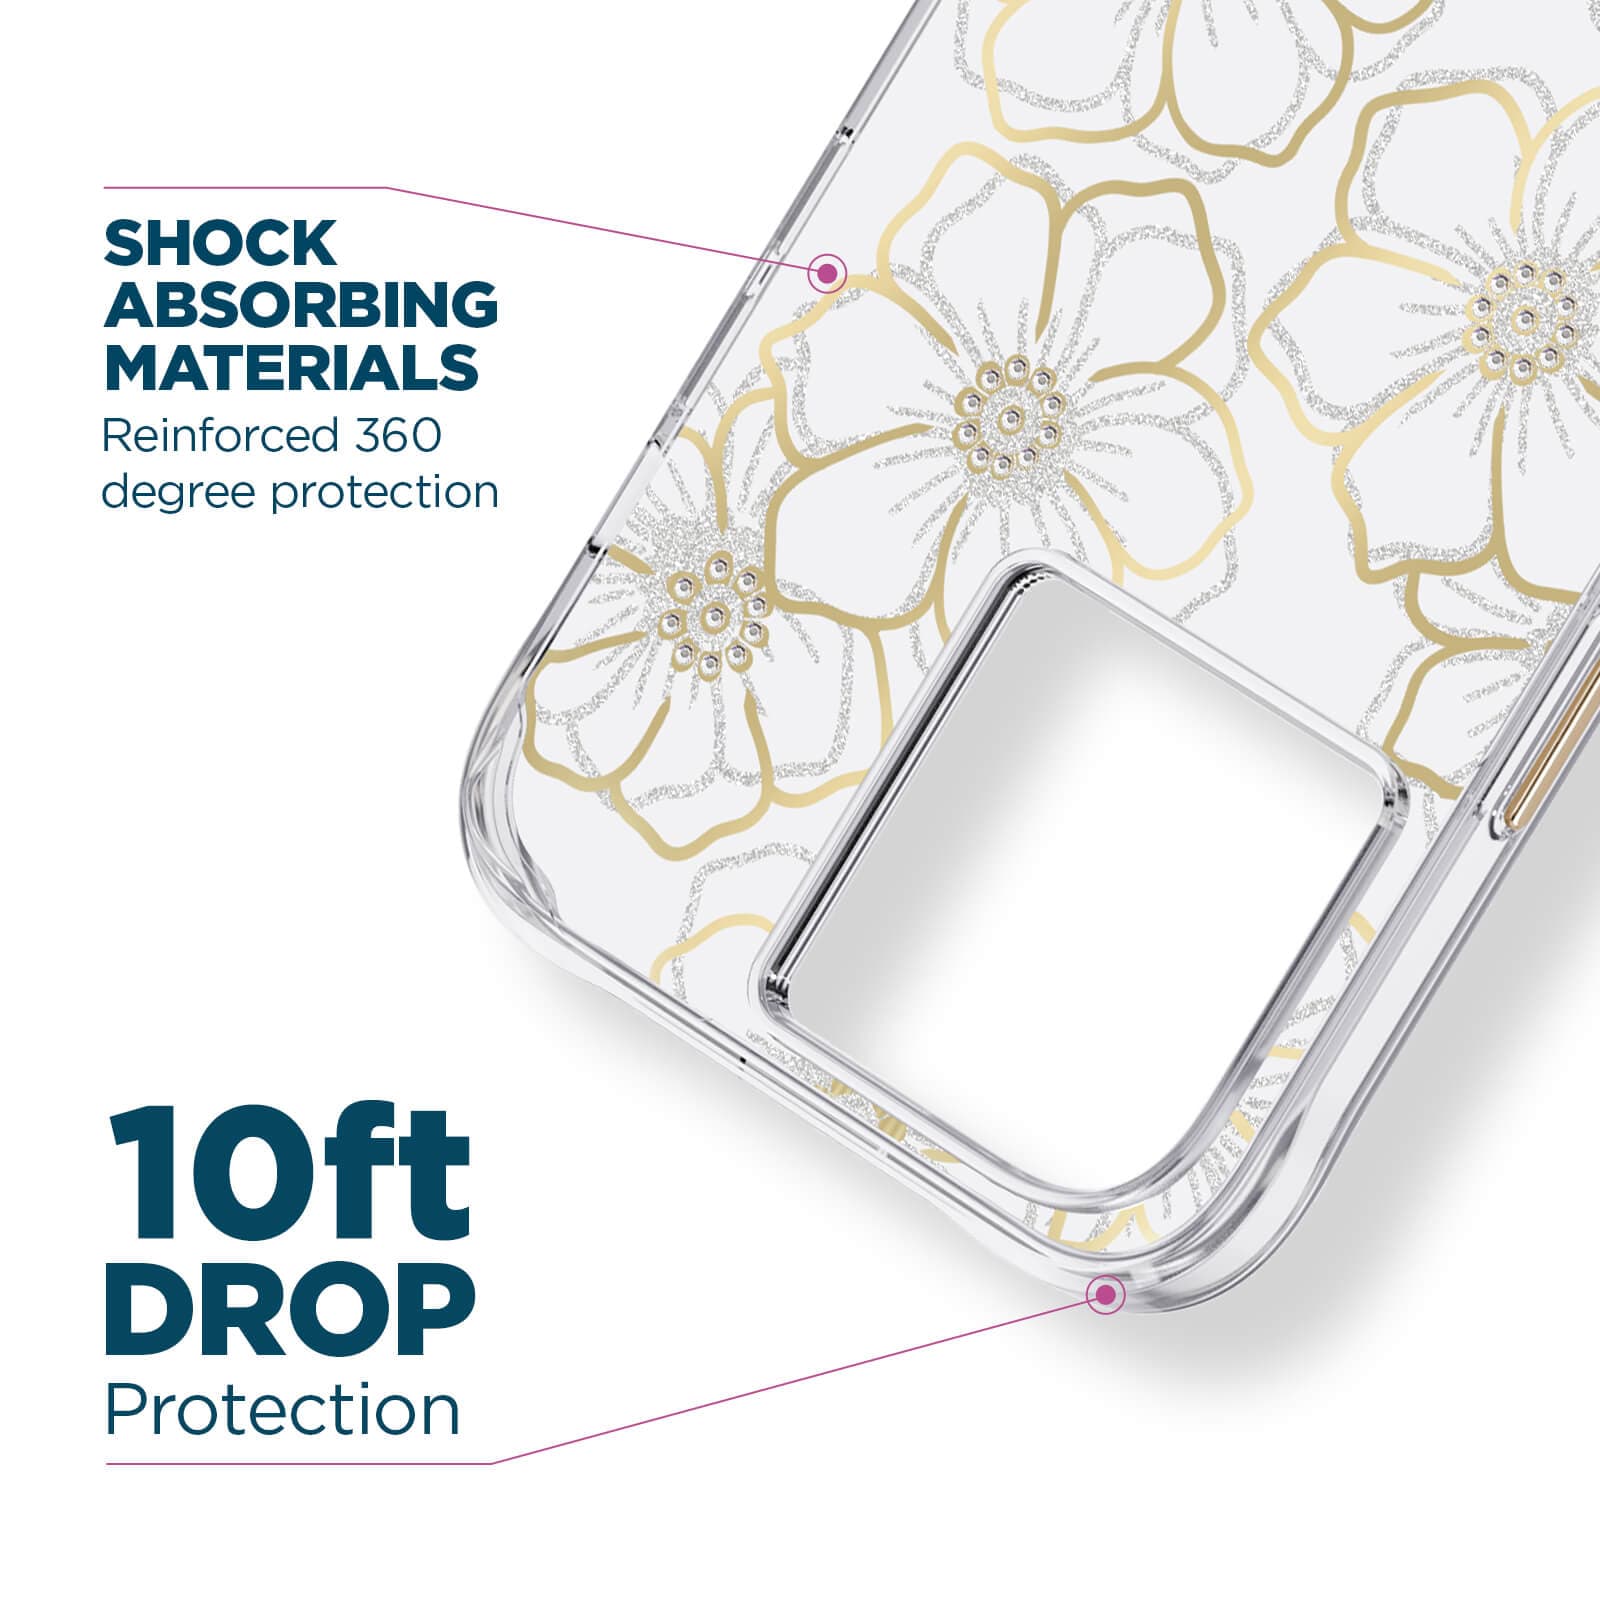 Shock absorbing materials. reinforced 360 degree protection. 10ft drop protection. color::Floral Gems